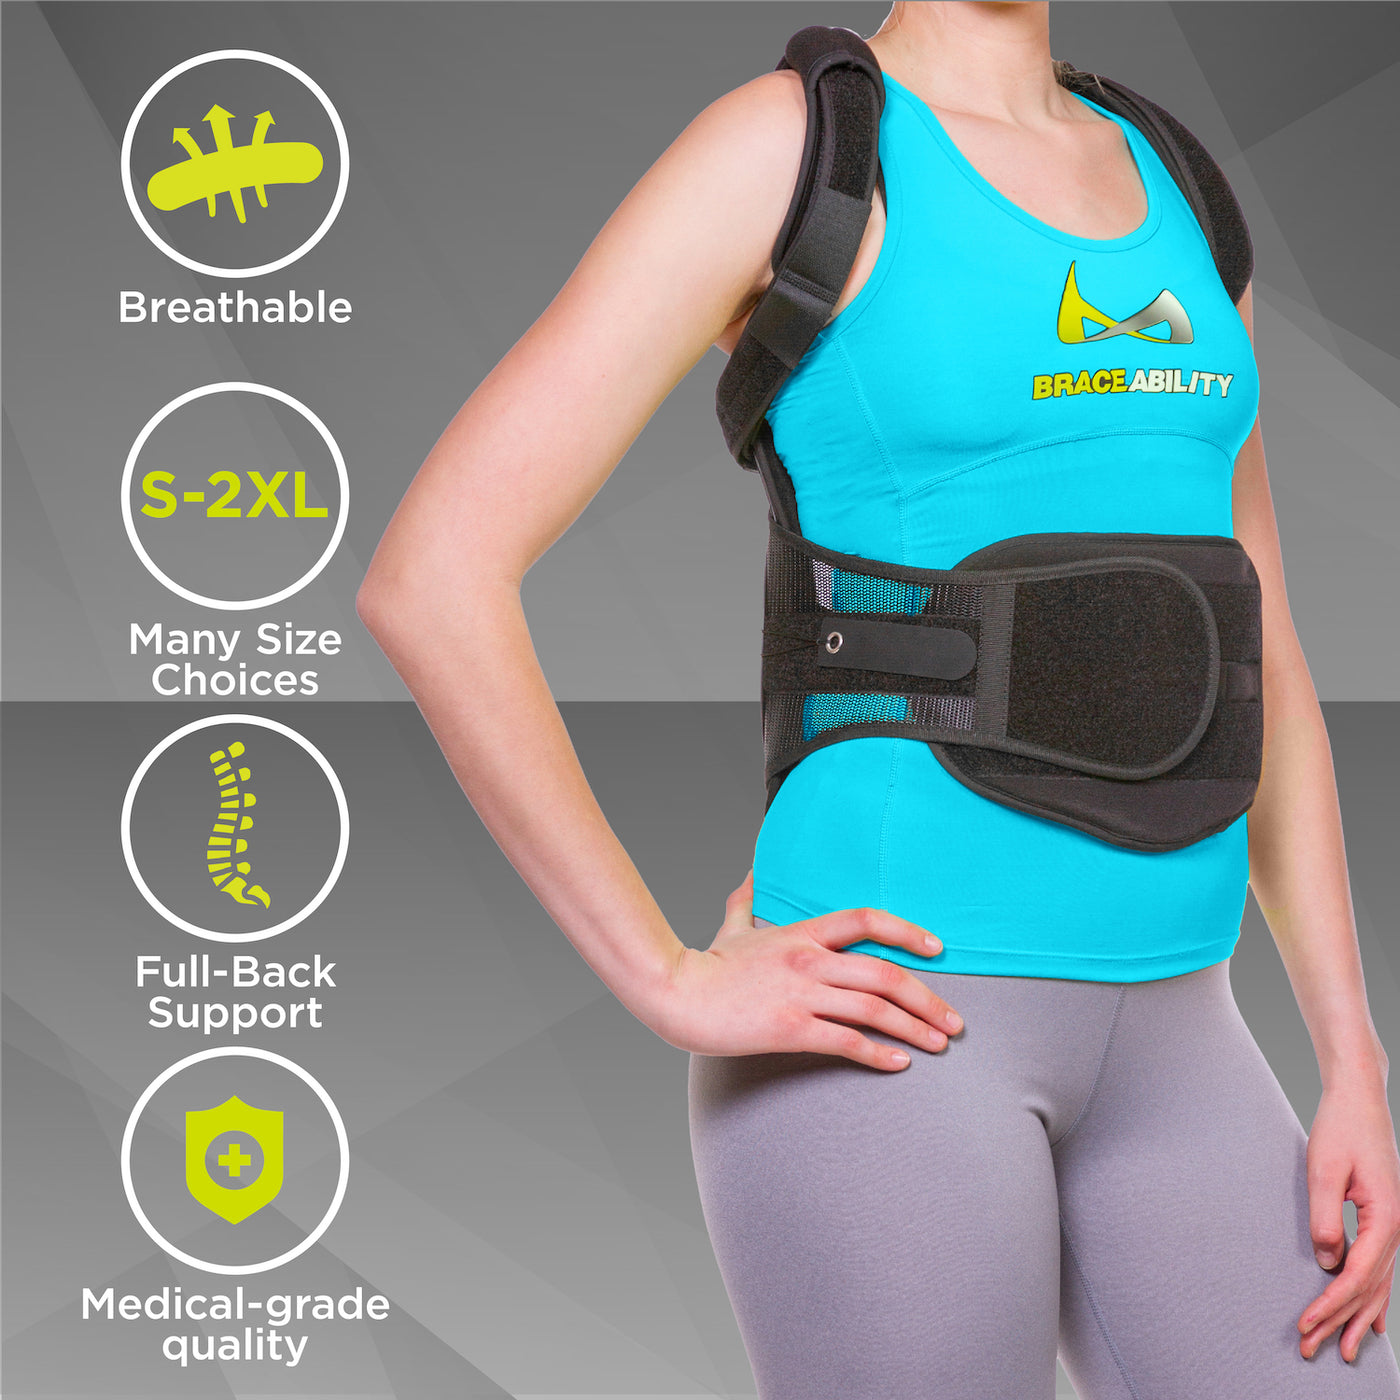 NEW## Spinal Brace Support Spine Recover Orthotics Kyphosis